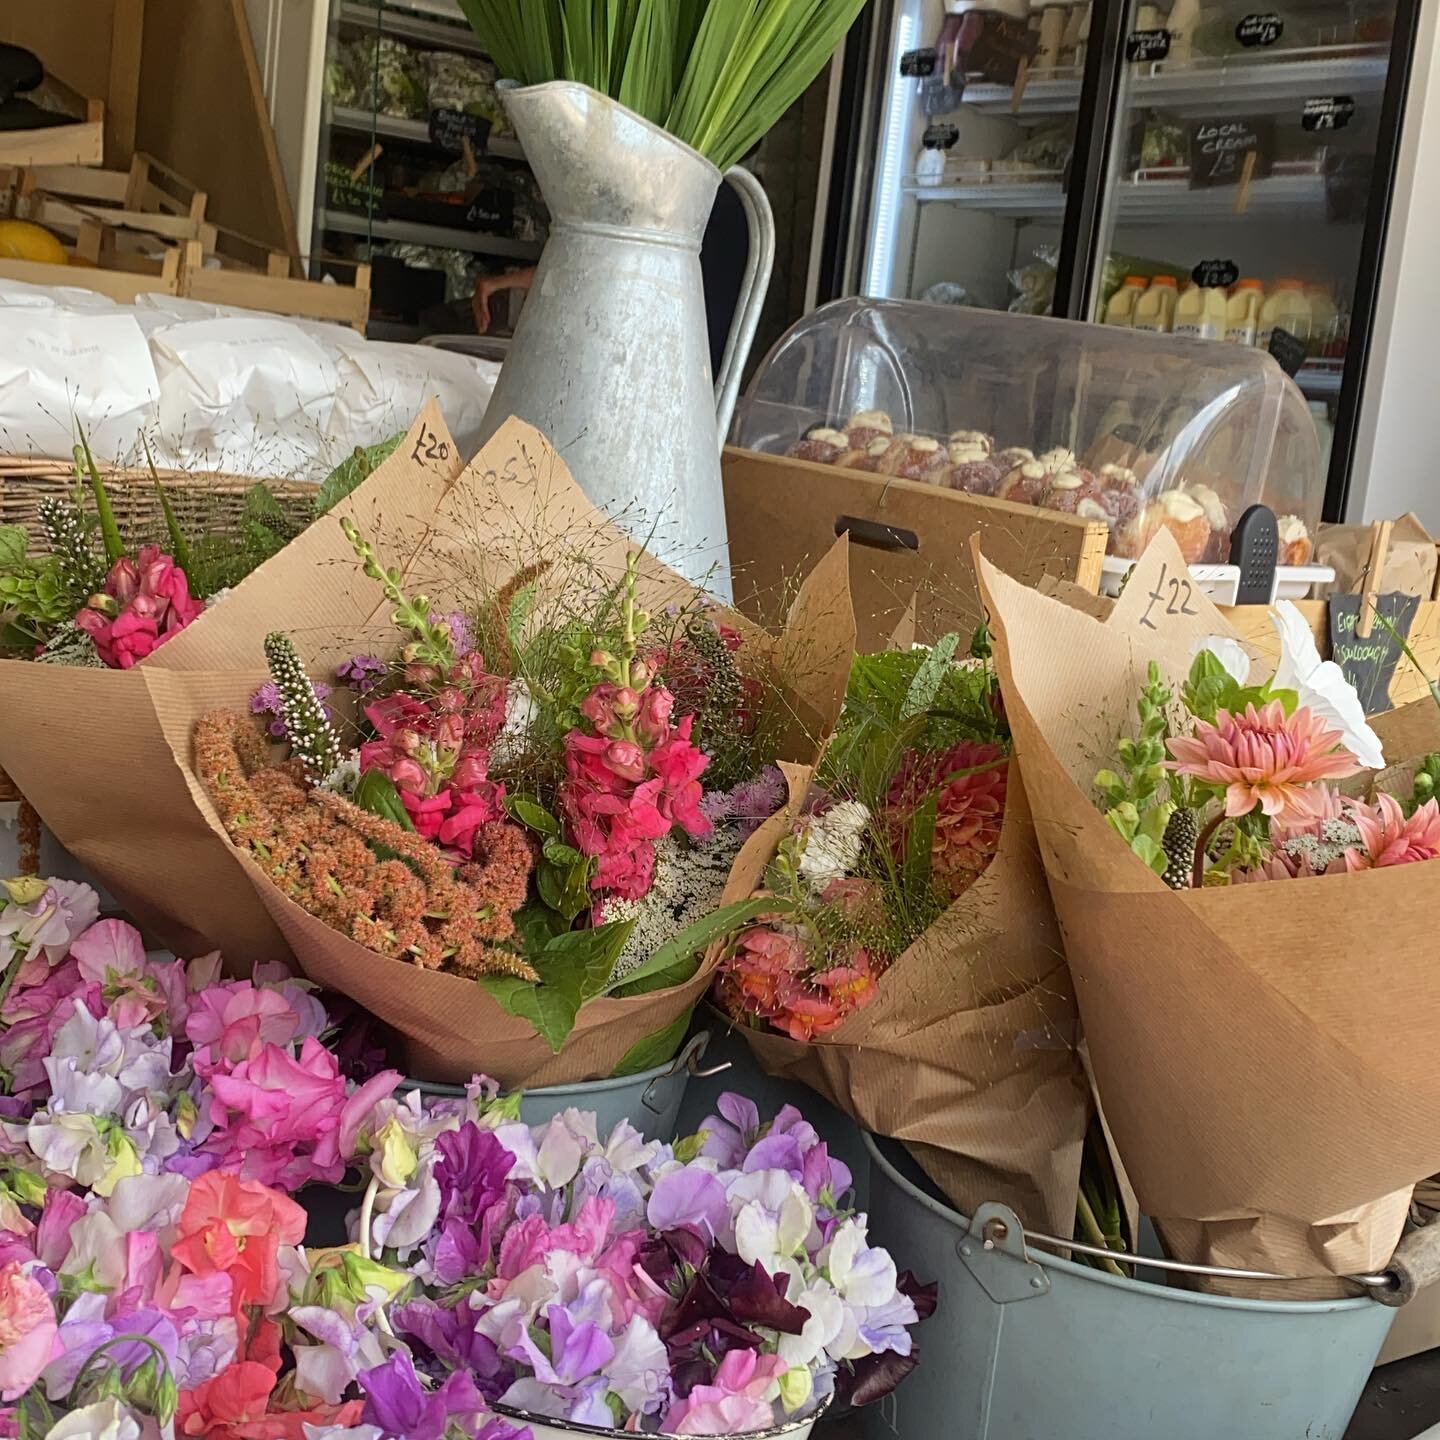 Back to normal! 

Shop full of flowers, all the breads, only 1 small Challah left, lots of fluffy burger buns.
gooseberry fool and jam doughnuts all out, Panmarino still hot! 

#shoplocal #freshsalad #lotsofgoodies